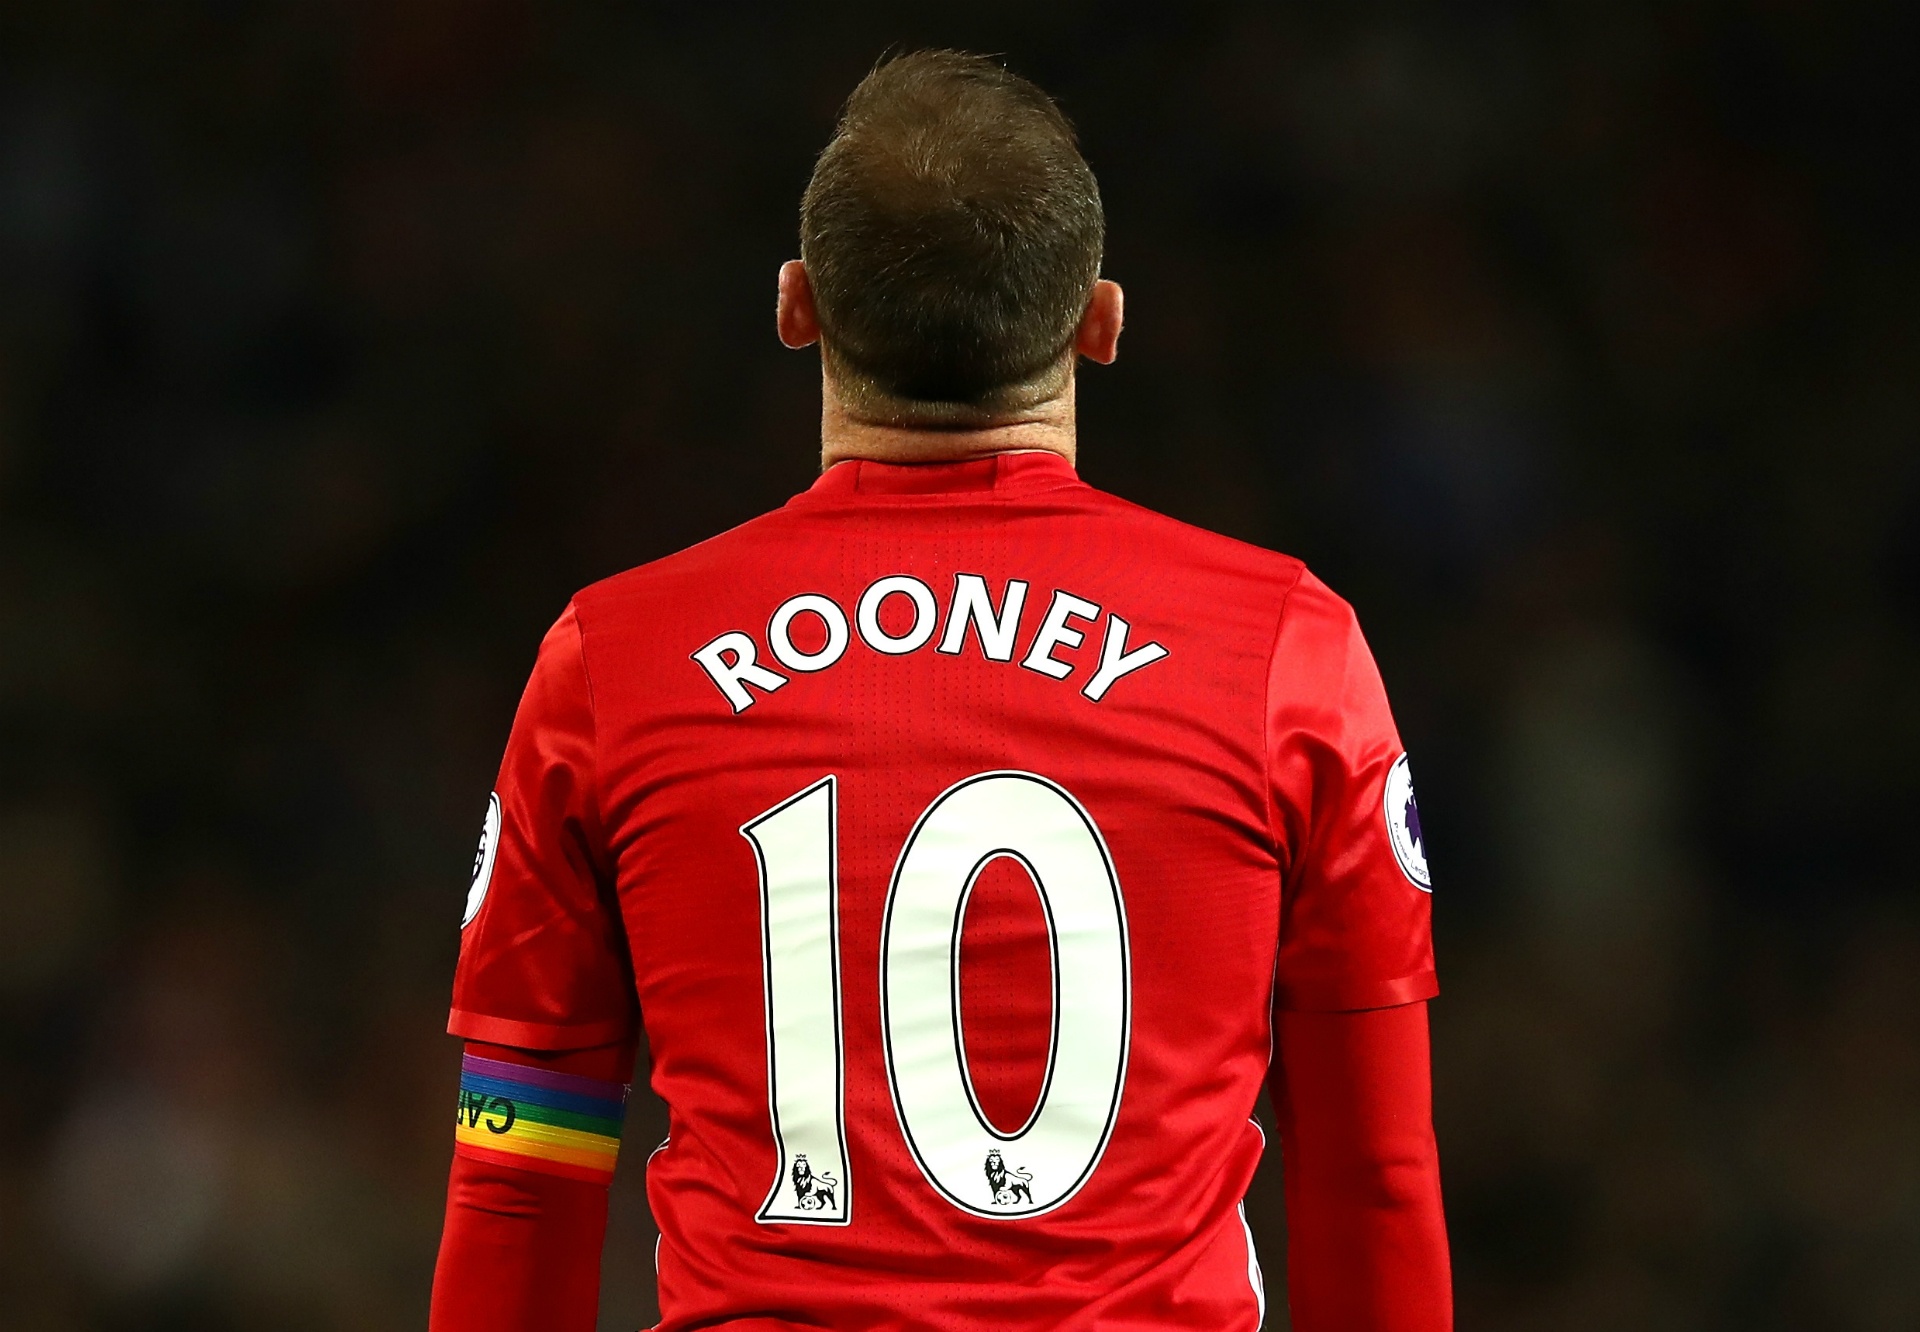 WATCH: Rooney shirt swap rejected on pitch by ex-Man City player